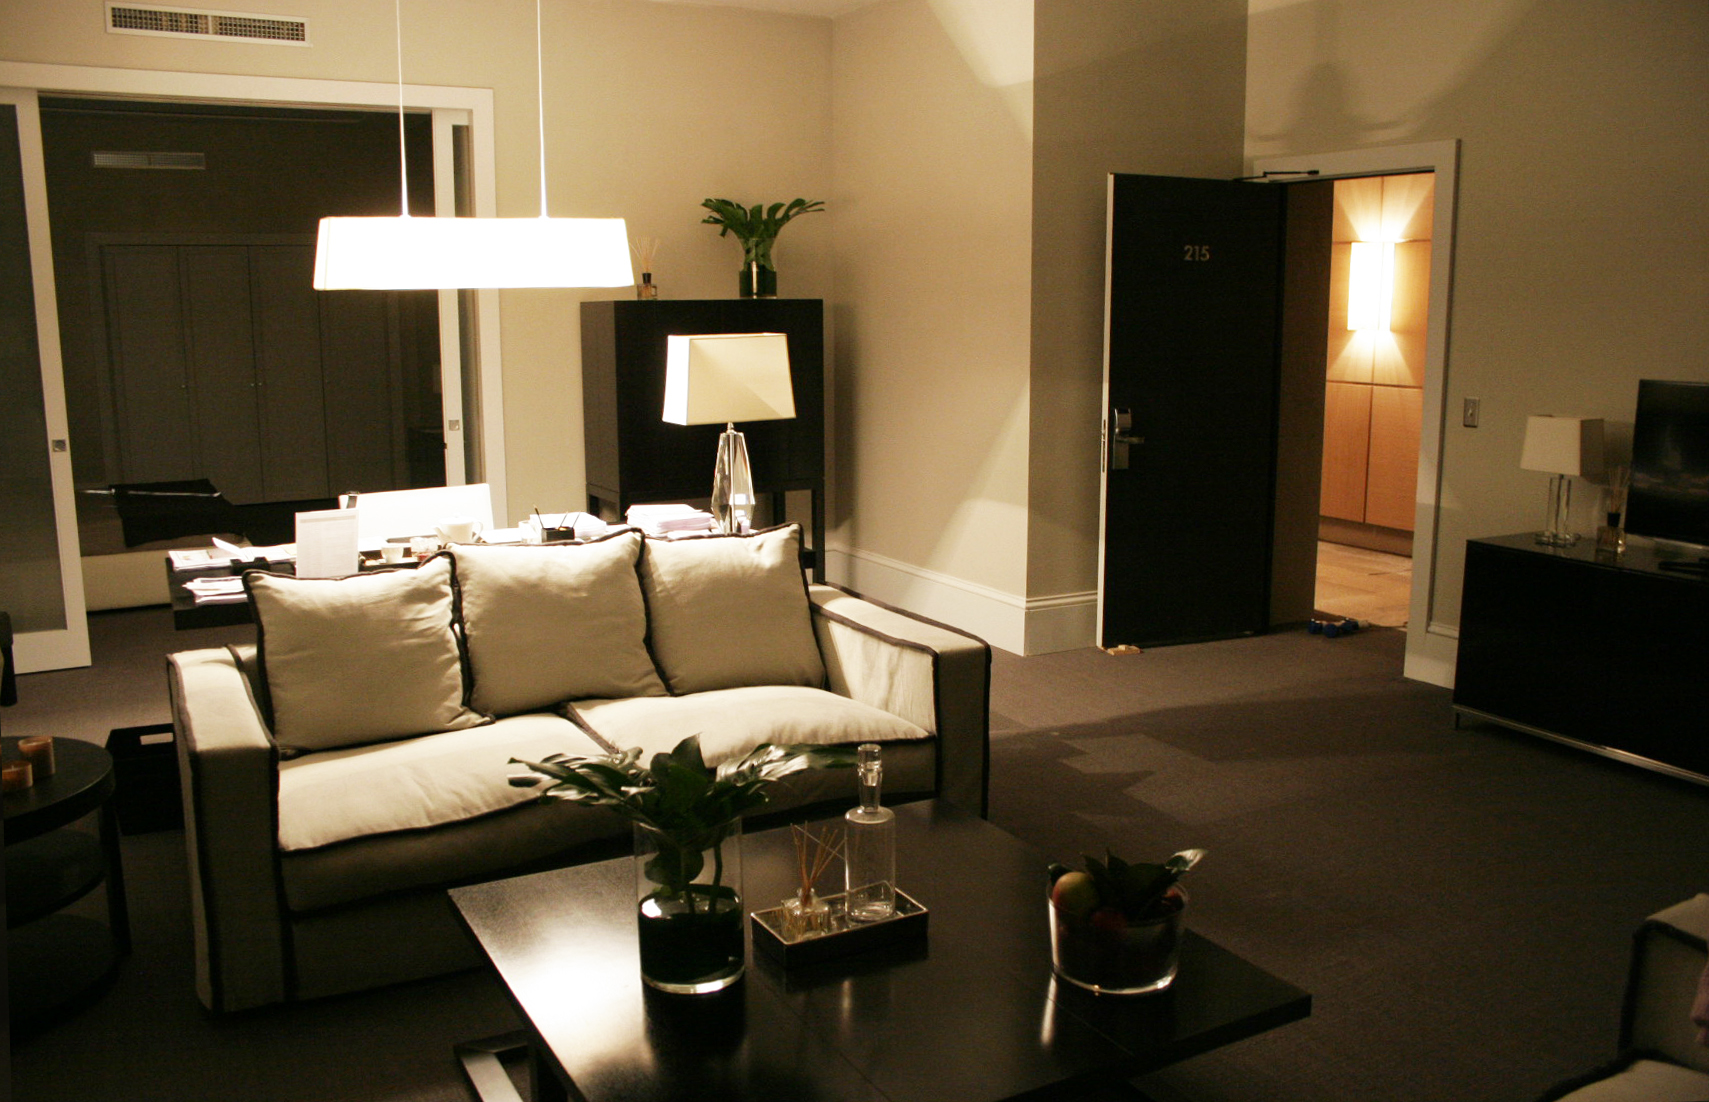 THIRD PERSON - Directed by Paul Haggis - Int. New York Hotel Room, Stage Set - ©2013 - Corsan